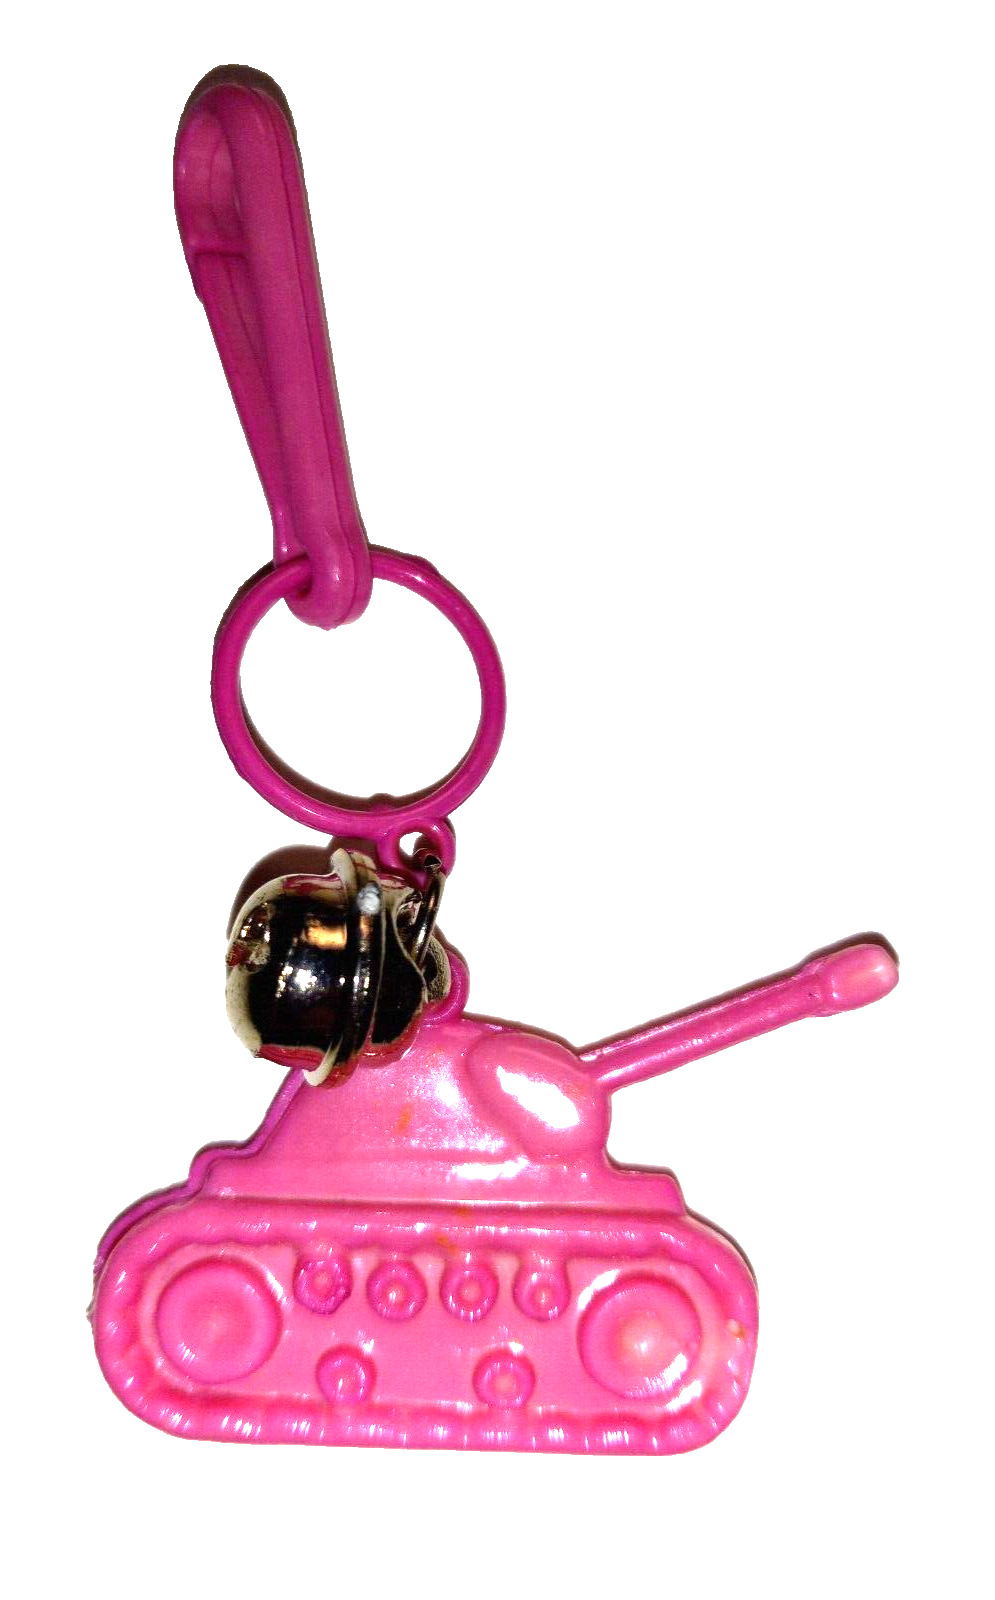 Vintage 1980s Plastic Charm Army Tank Pink 80s Charms Necklace Clip On Retro